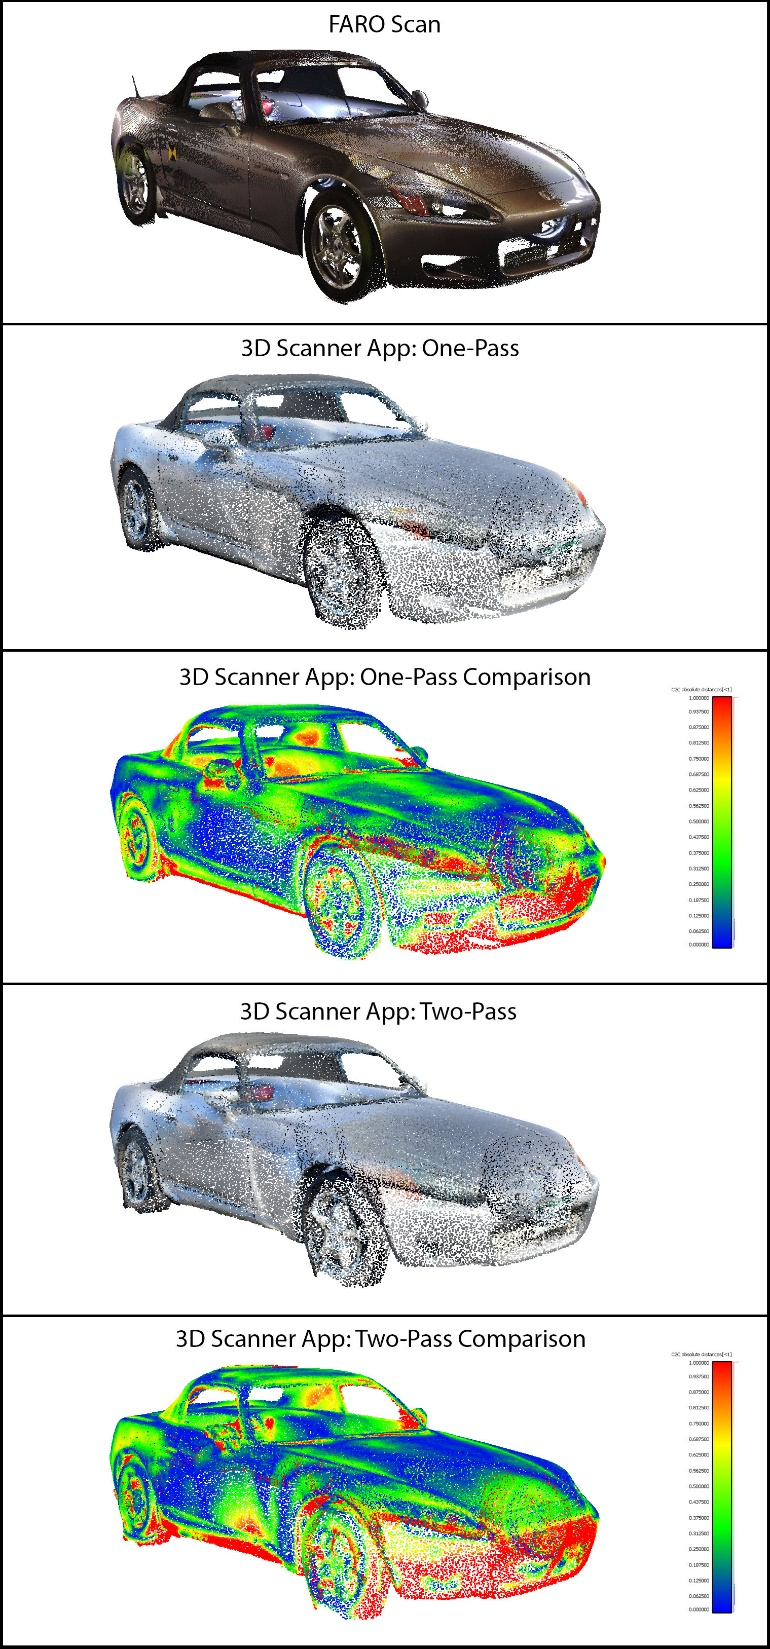 Figure 18 - A visual comparison of the 3D Scanner App vs. FARO, Grey 2003 Honda S2000 scans: Blue = .25 inches or less in variance. Red = greater than .75 inches in variance.